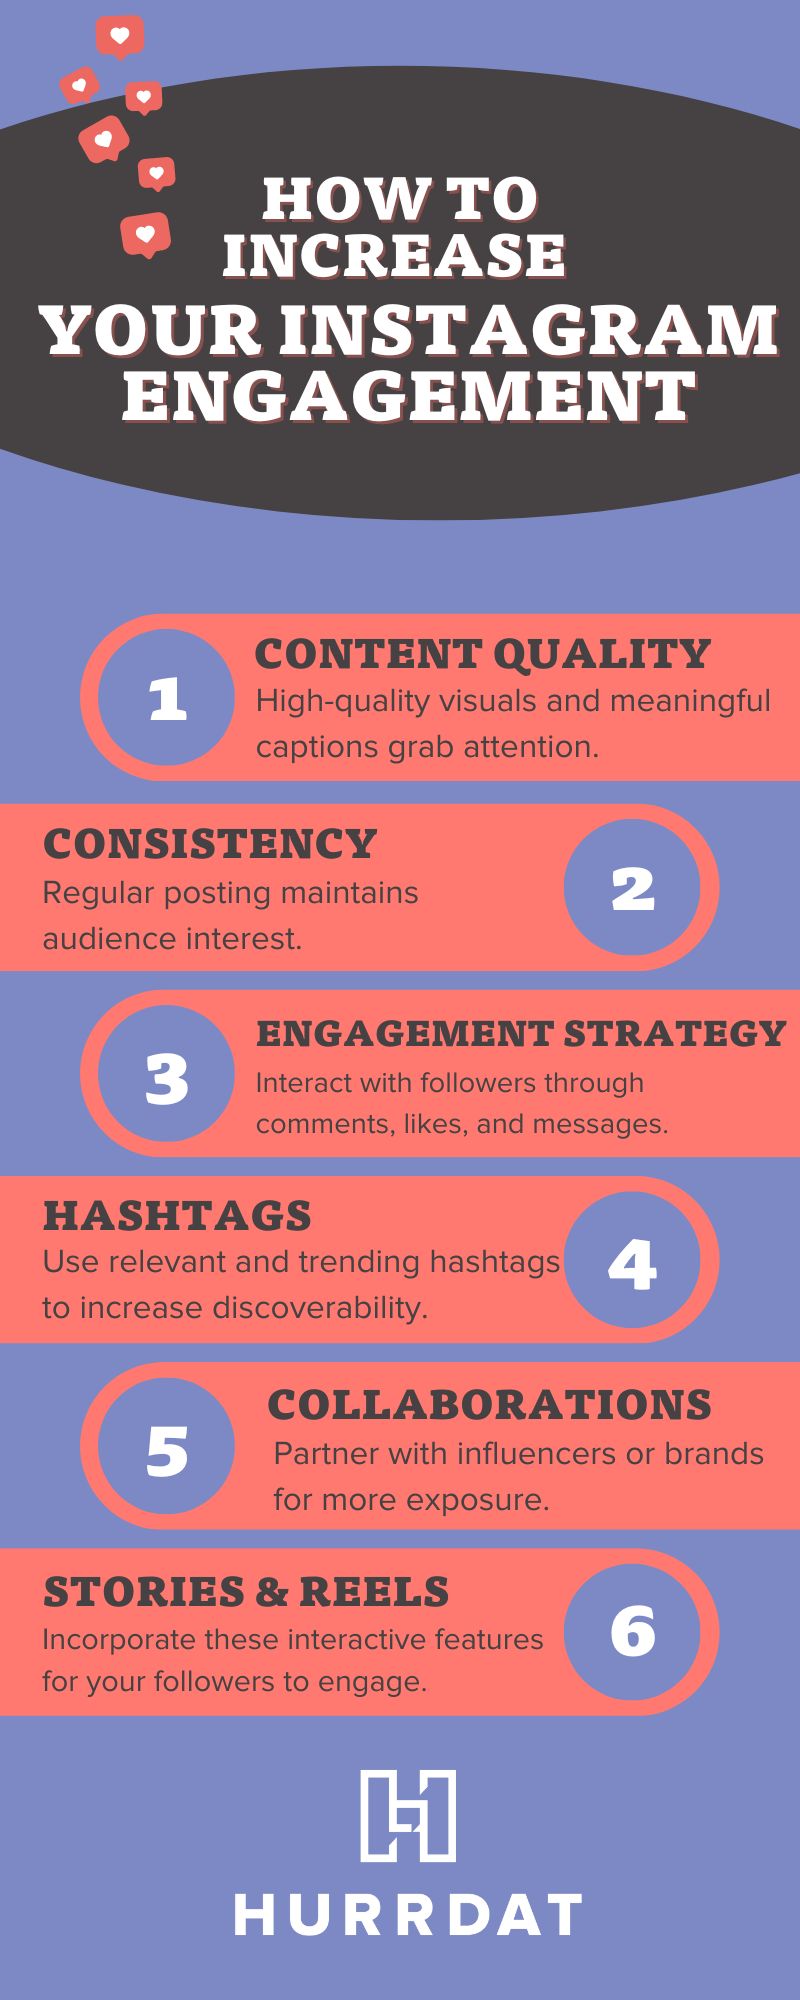 Infographic with six ways to increase your instagram engagement, including content quality, consistency, engagement strategy, hashtags, collaborations, and Stories and Reels